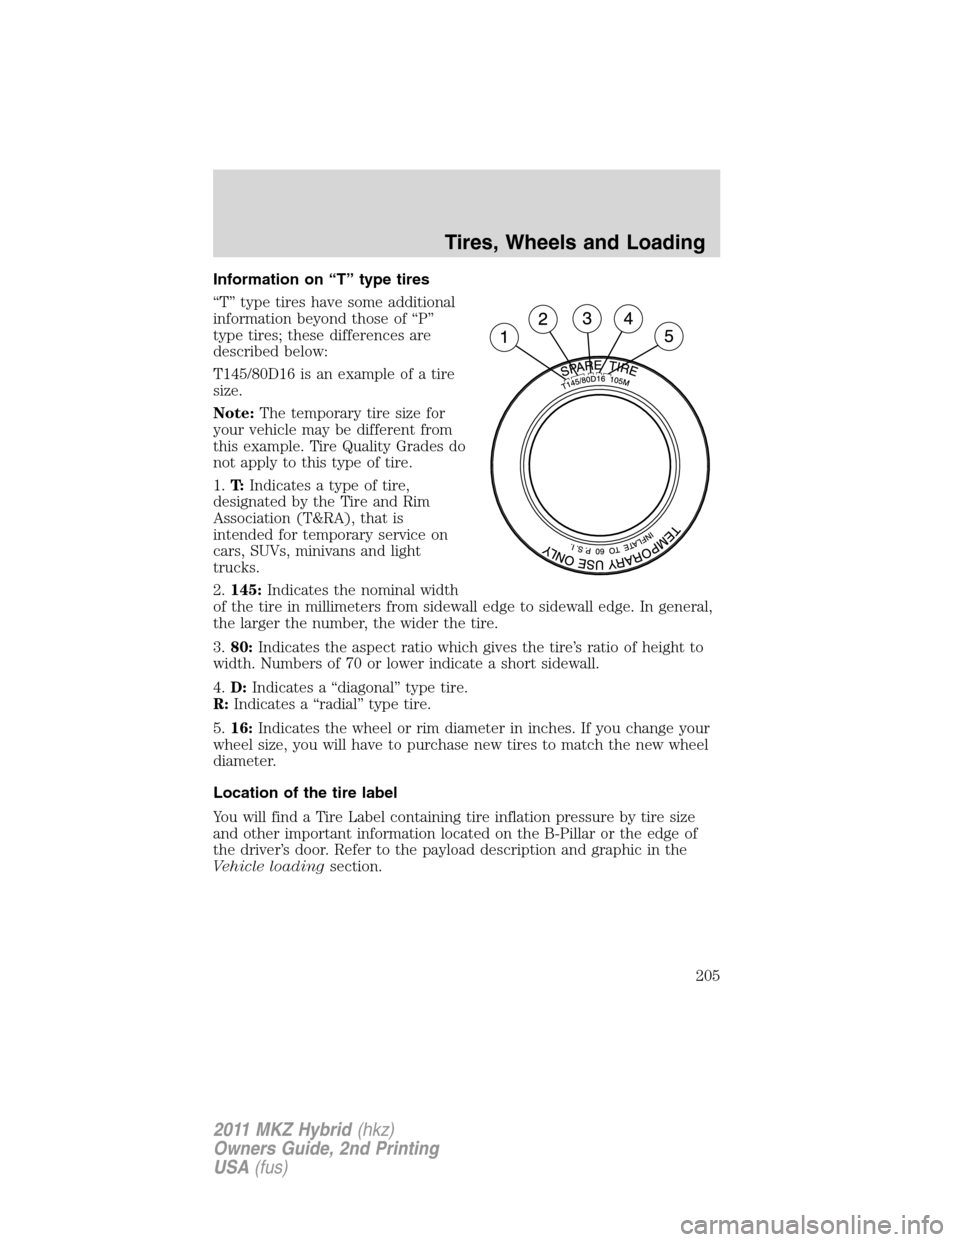 LINCOLN MKZ HYBRID 2011  Owners Manual Information on “T” type tires
“T” type tires have some additional
information beyond those of “P”
type tires; these differences are
described below:
T145/80D16 is an example of a tire
size